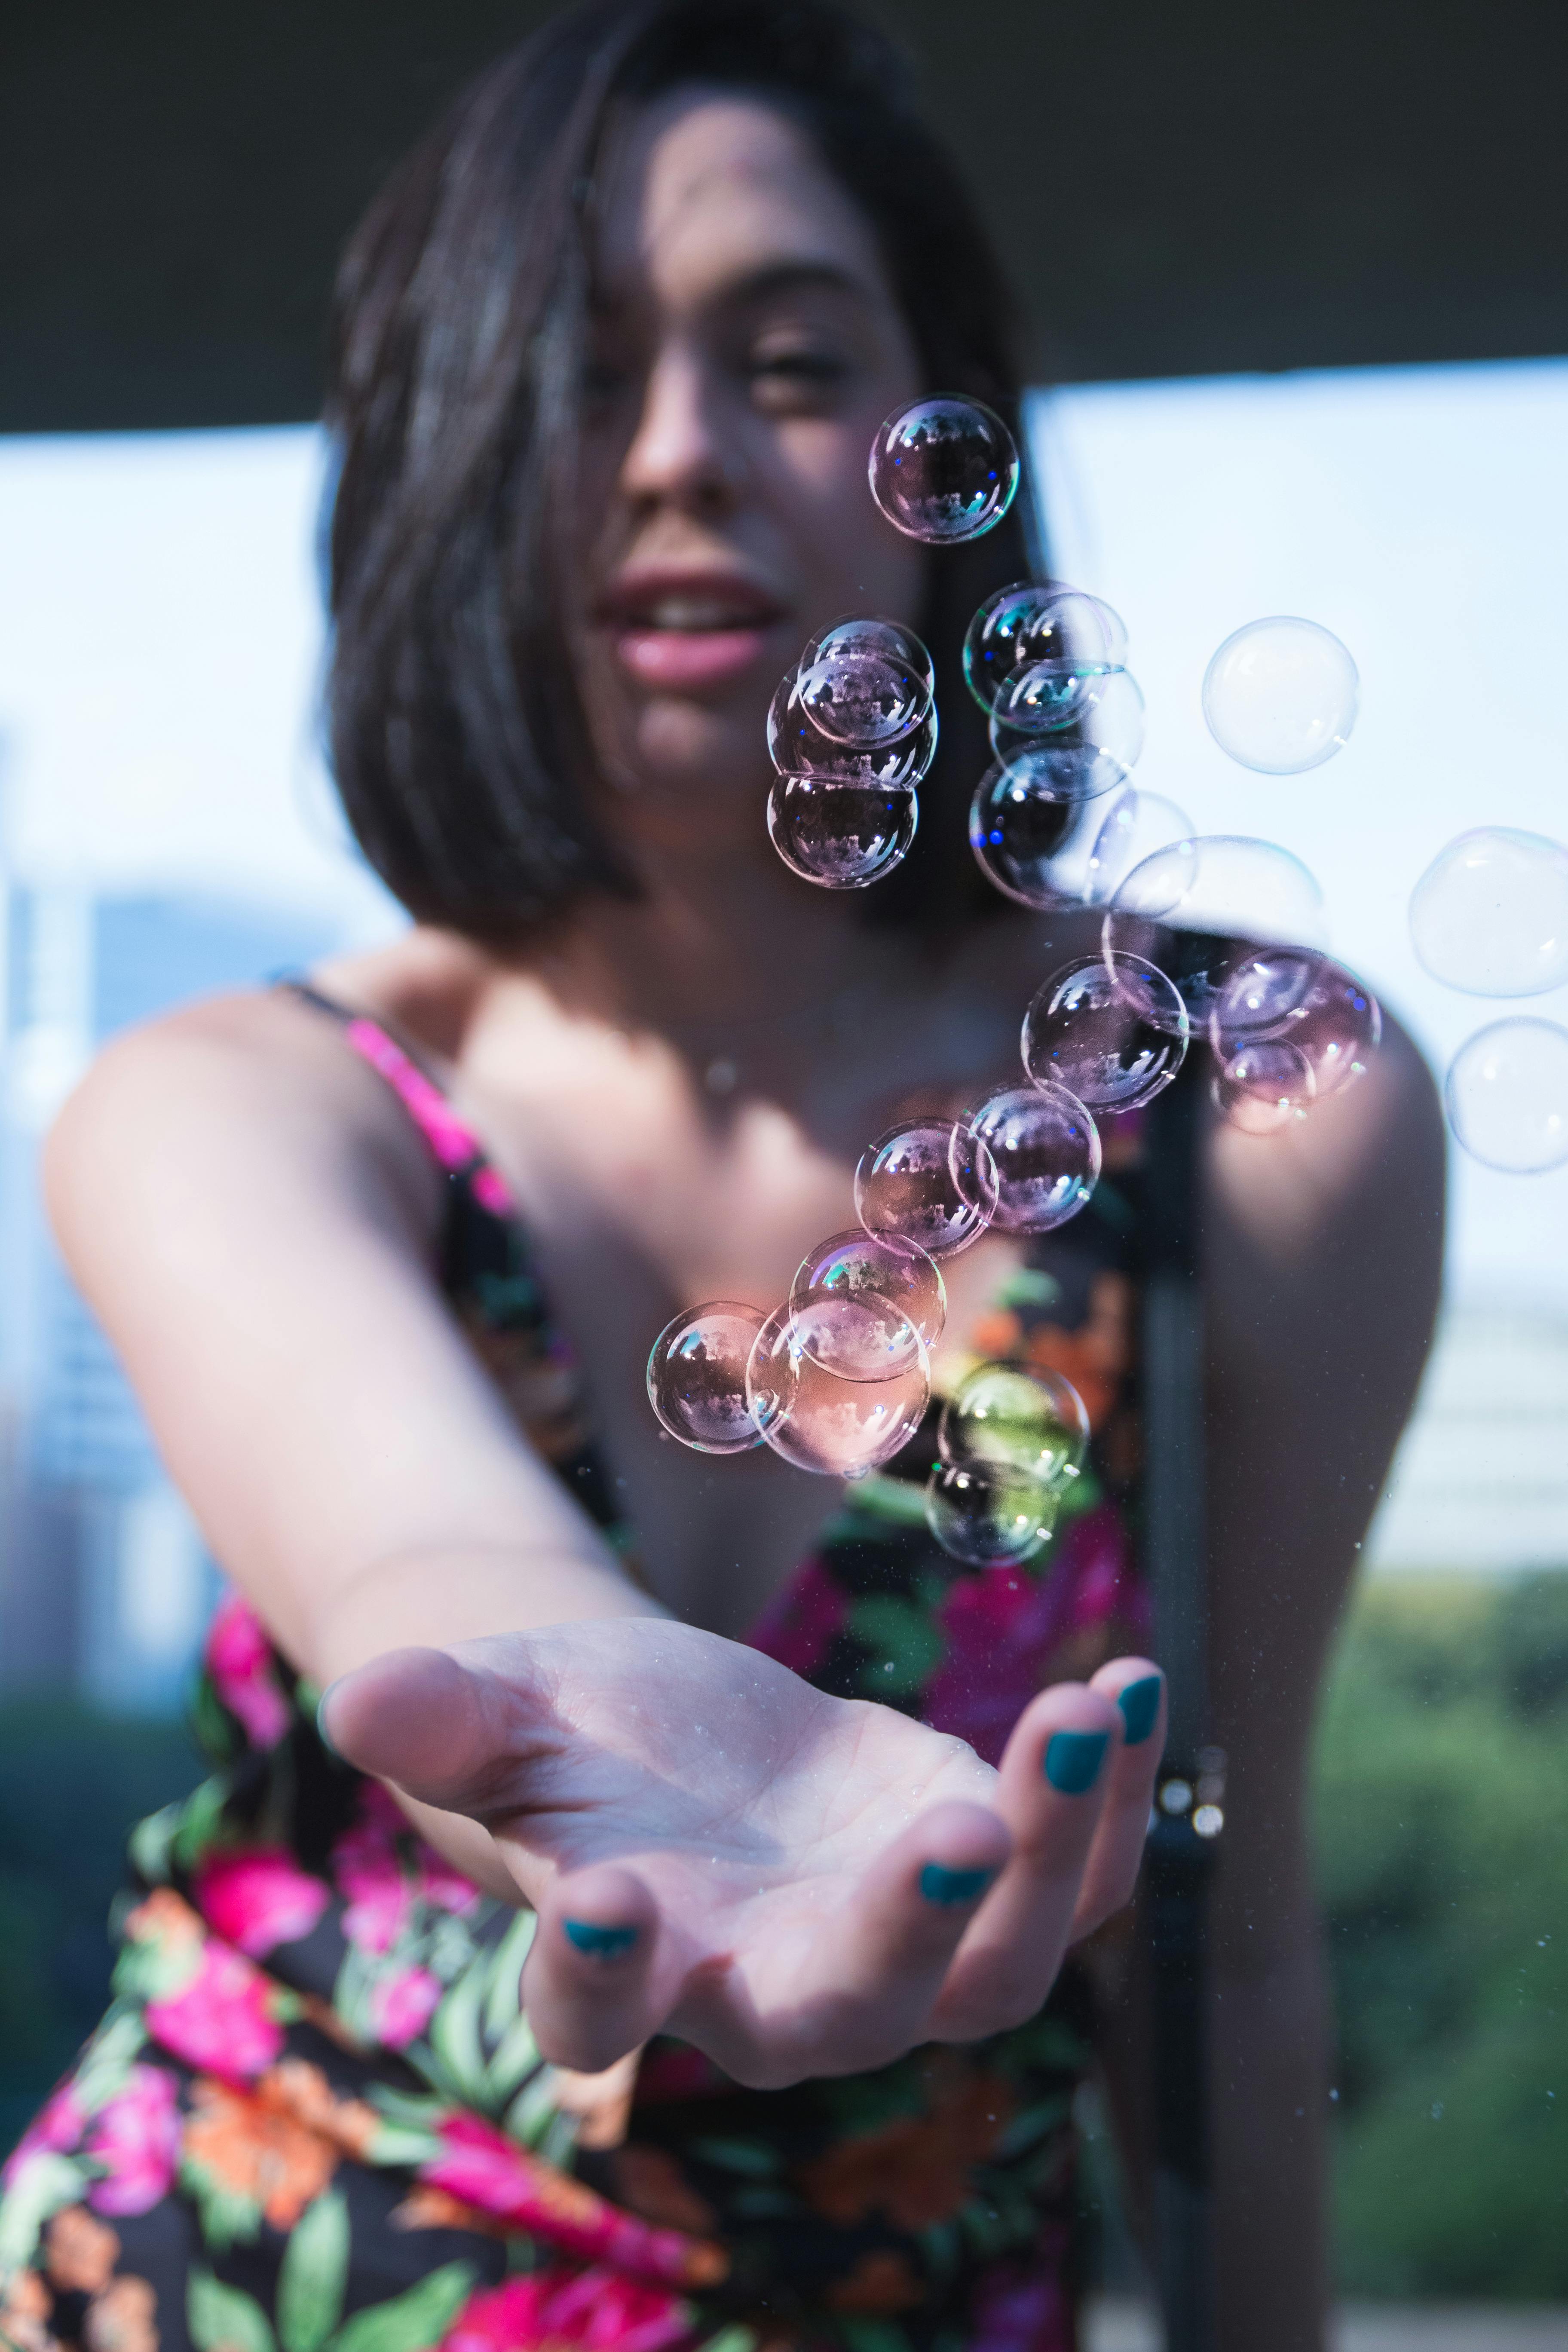 Selective Focus Photography Of Woman Reaching For Bubbles